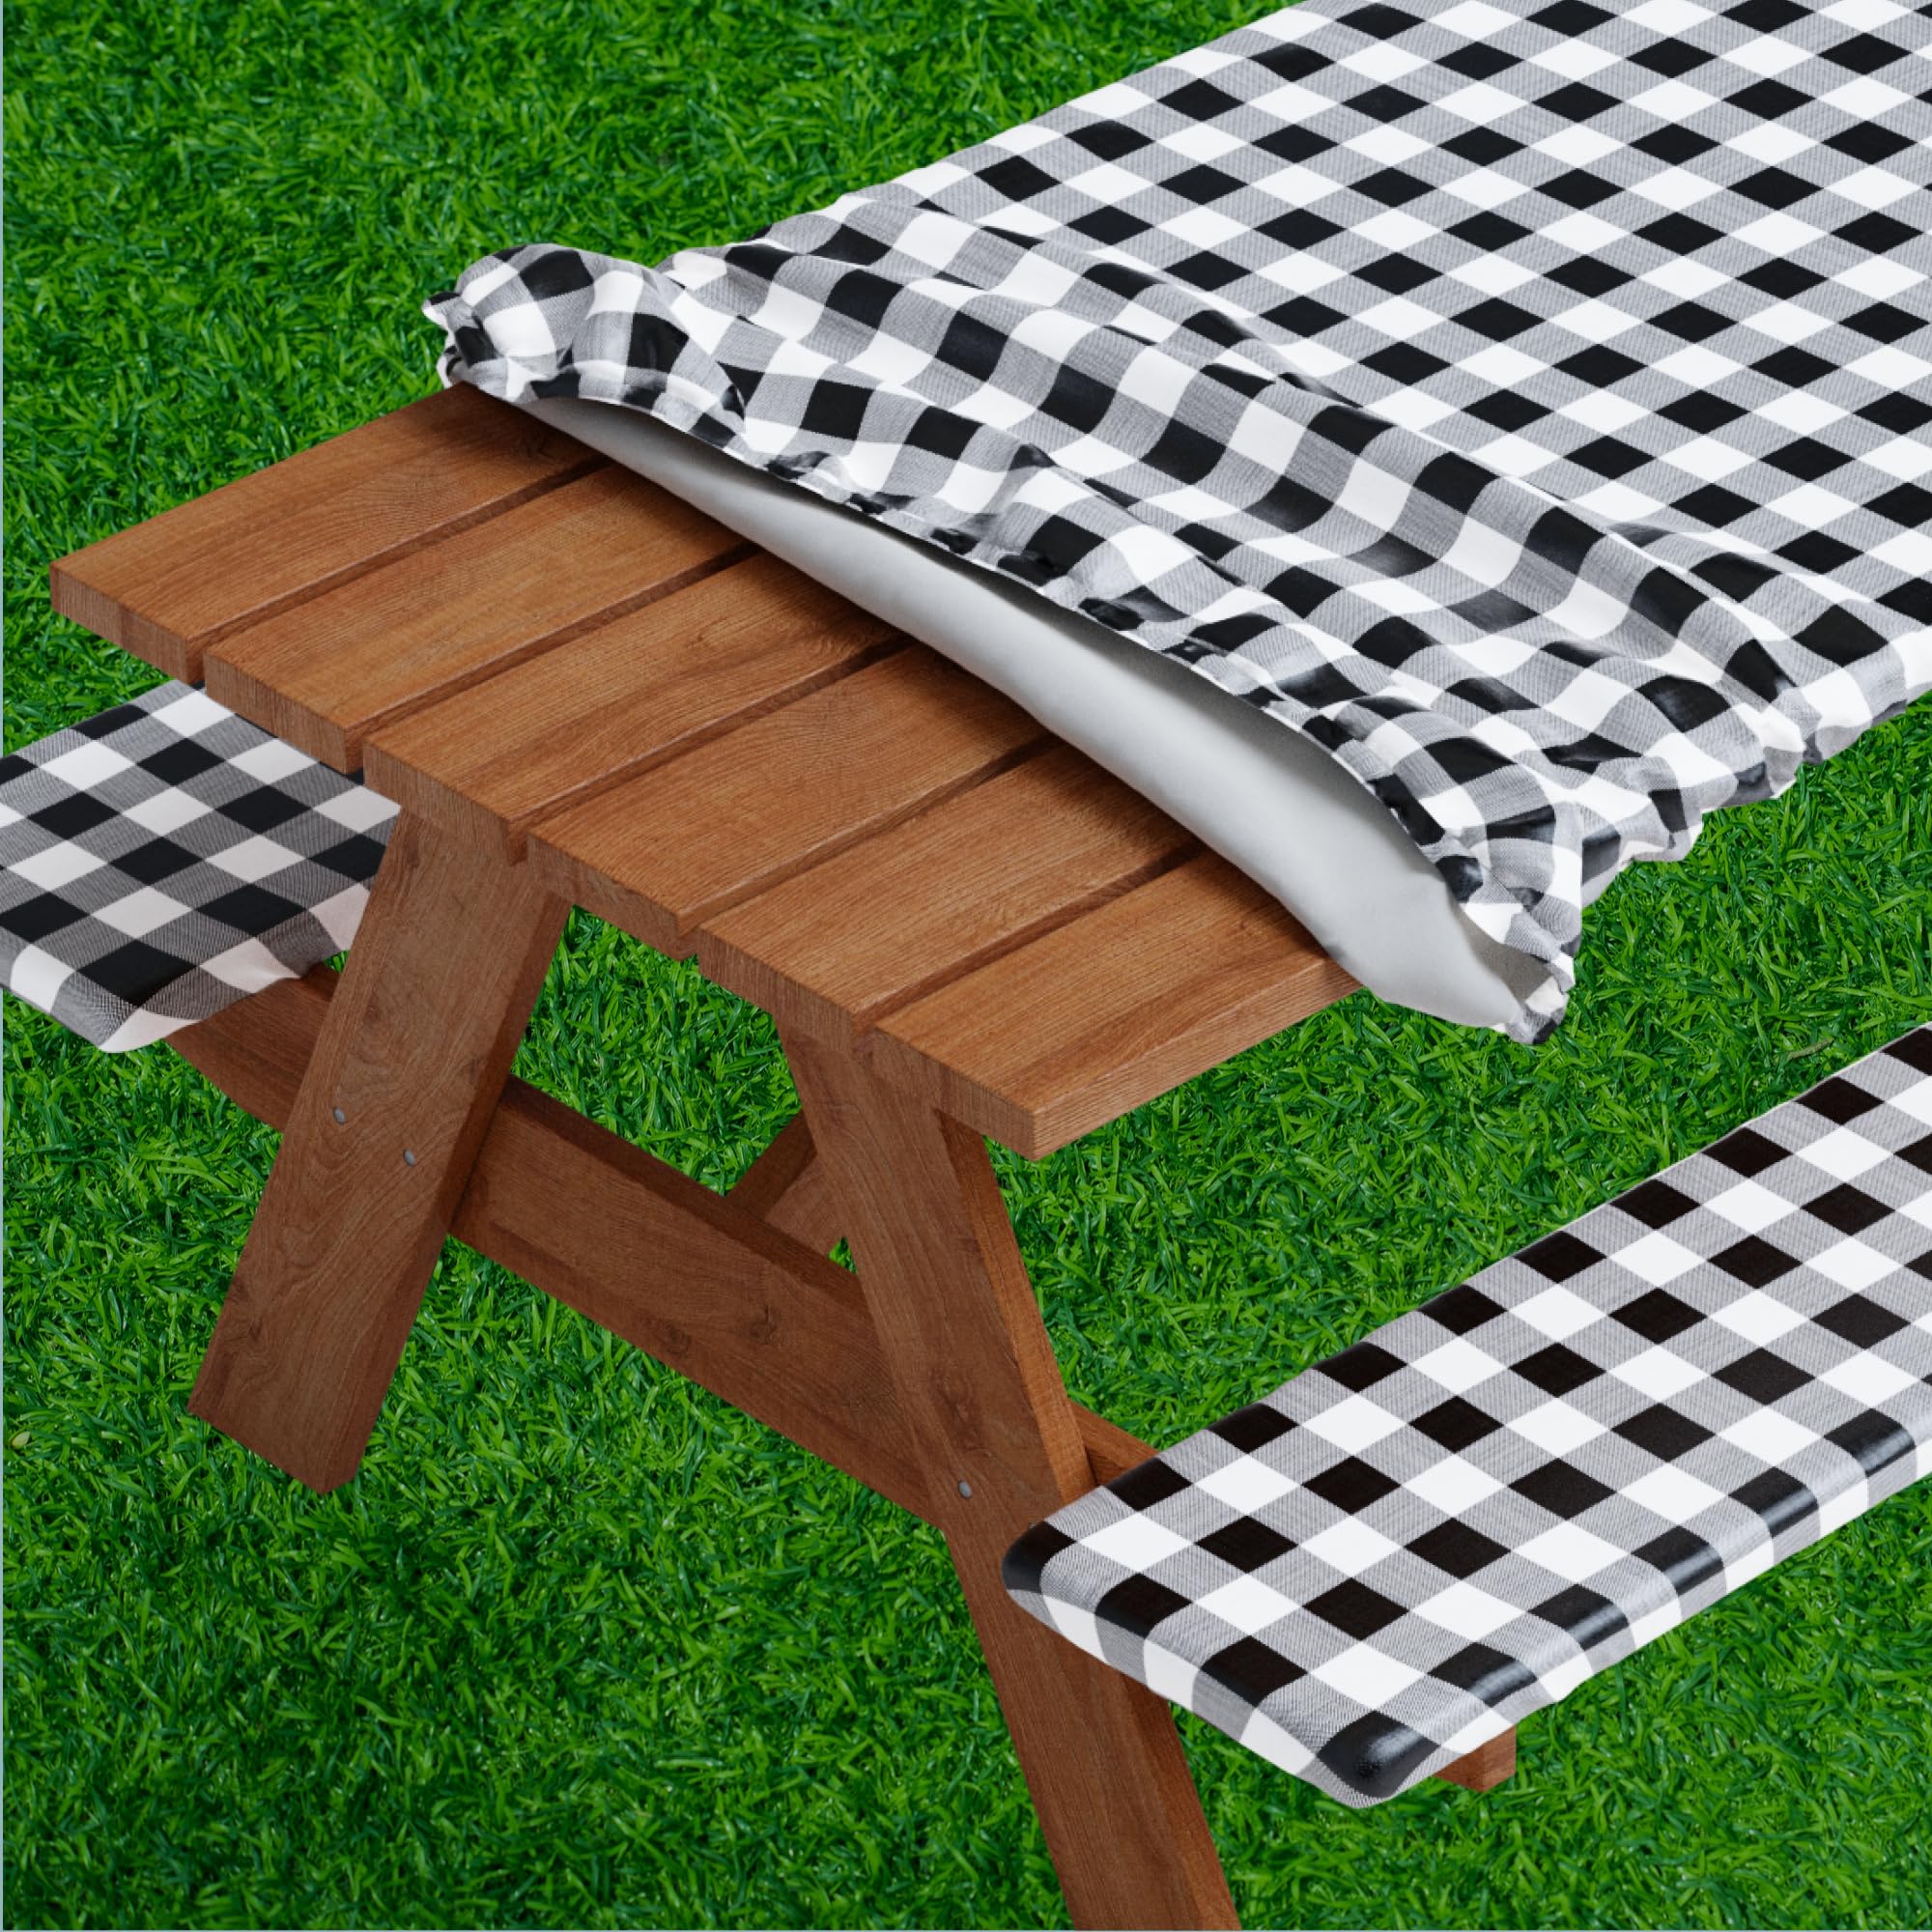 Sorfey Picnic Table Cover with Bench Covers -Fitted with Elastic, Vinyl with Flannel Back, Fits for Table 30"x 96" Rectangle,Water Proof, Checked Yellow Design  - Very Good